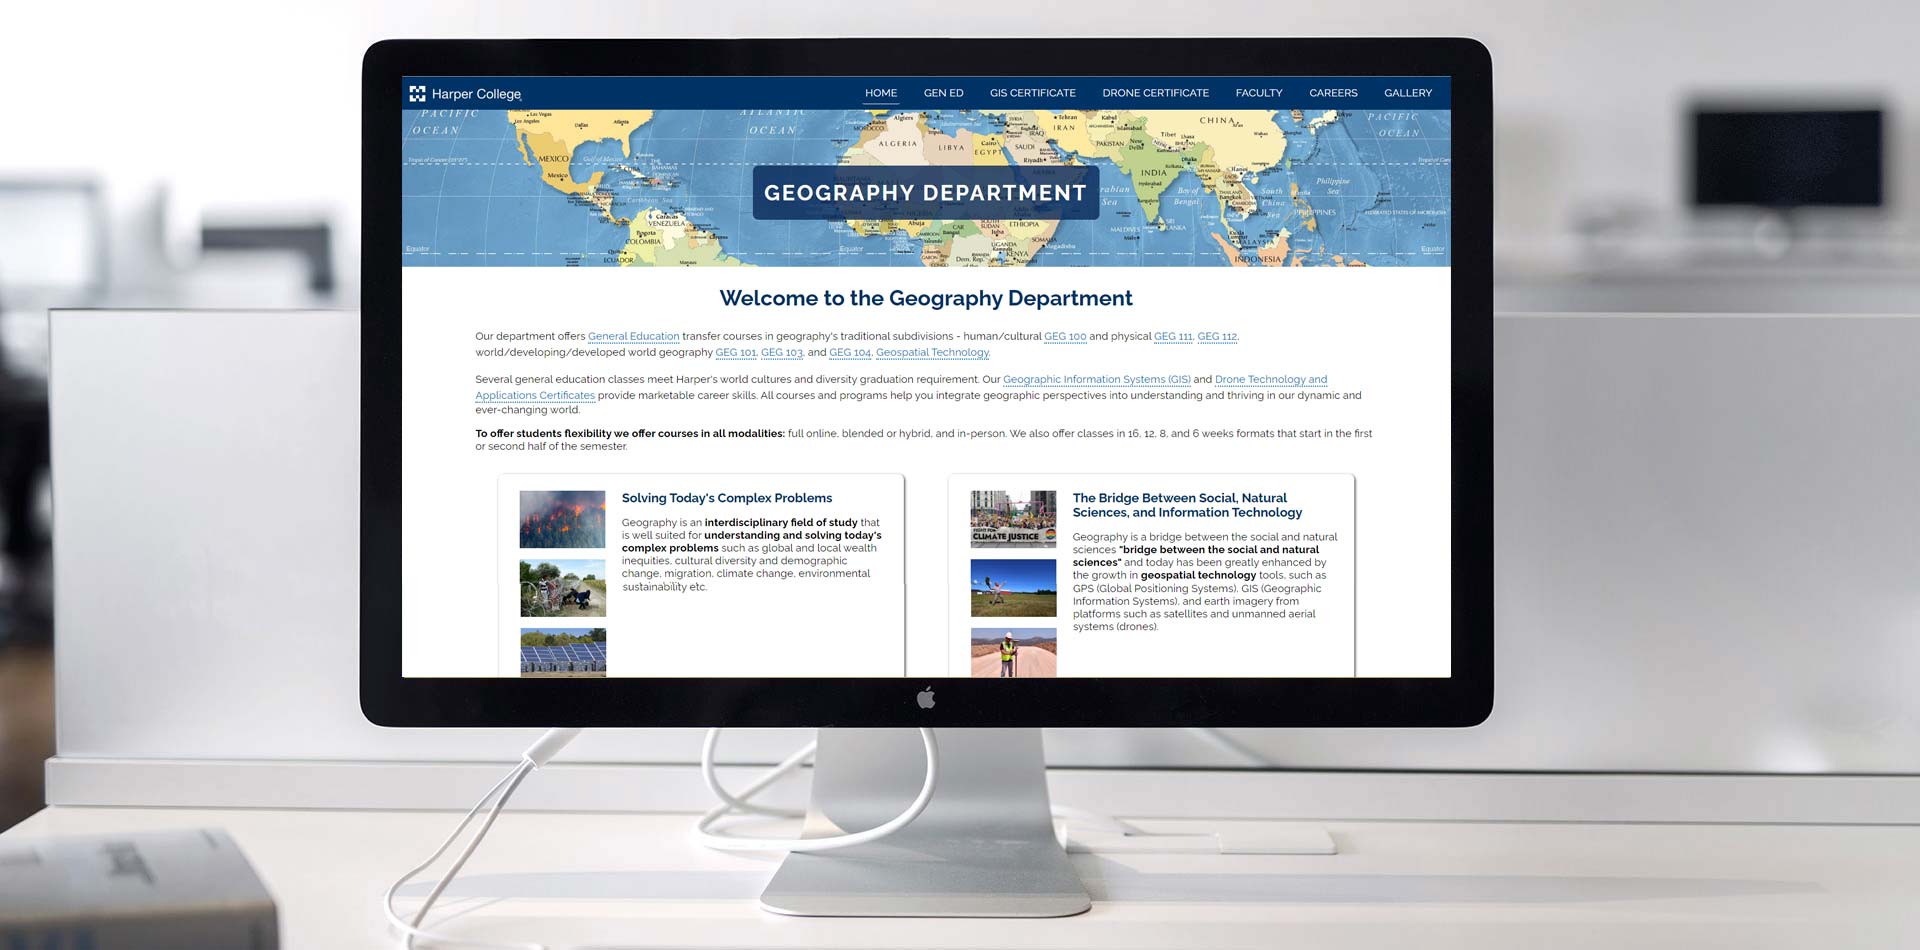 <h1>Harper College Geography Department Redesign</h1>